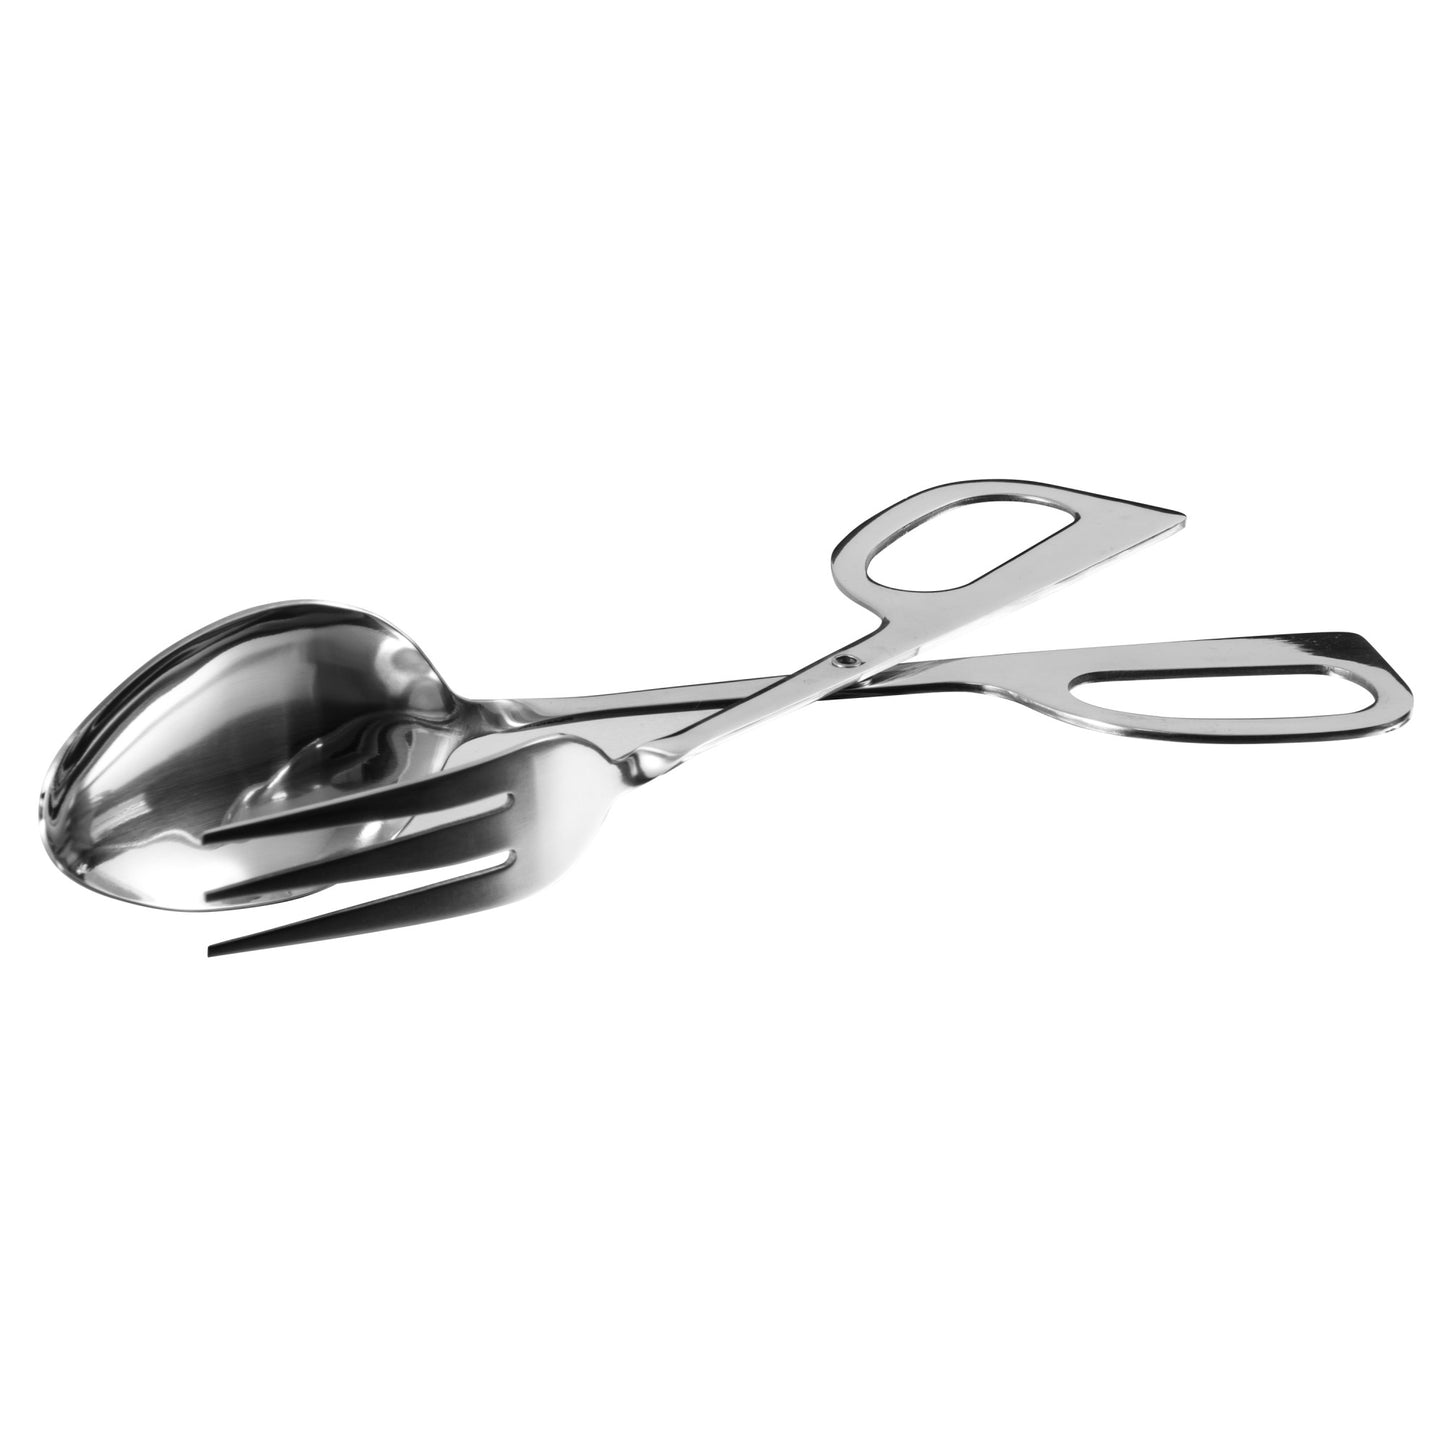 ST-10 - 10" Fork and Spoon Salad Tongs, Satin Finish Stainless Steel